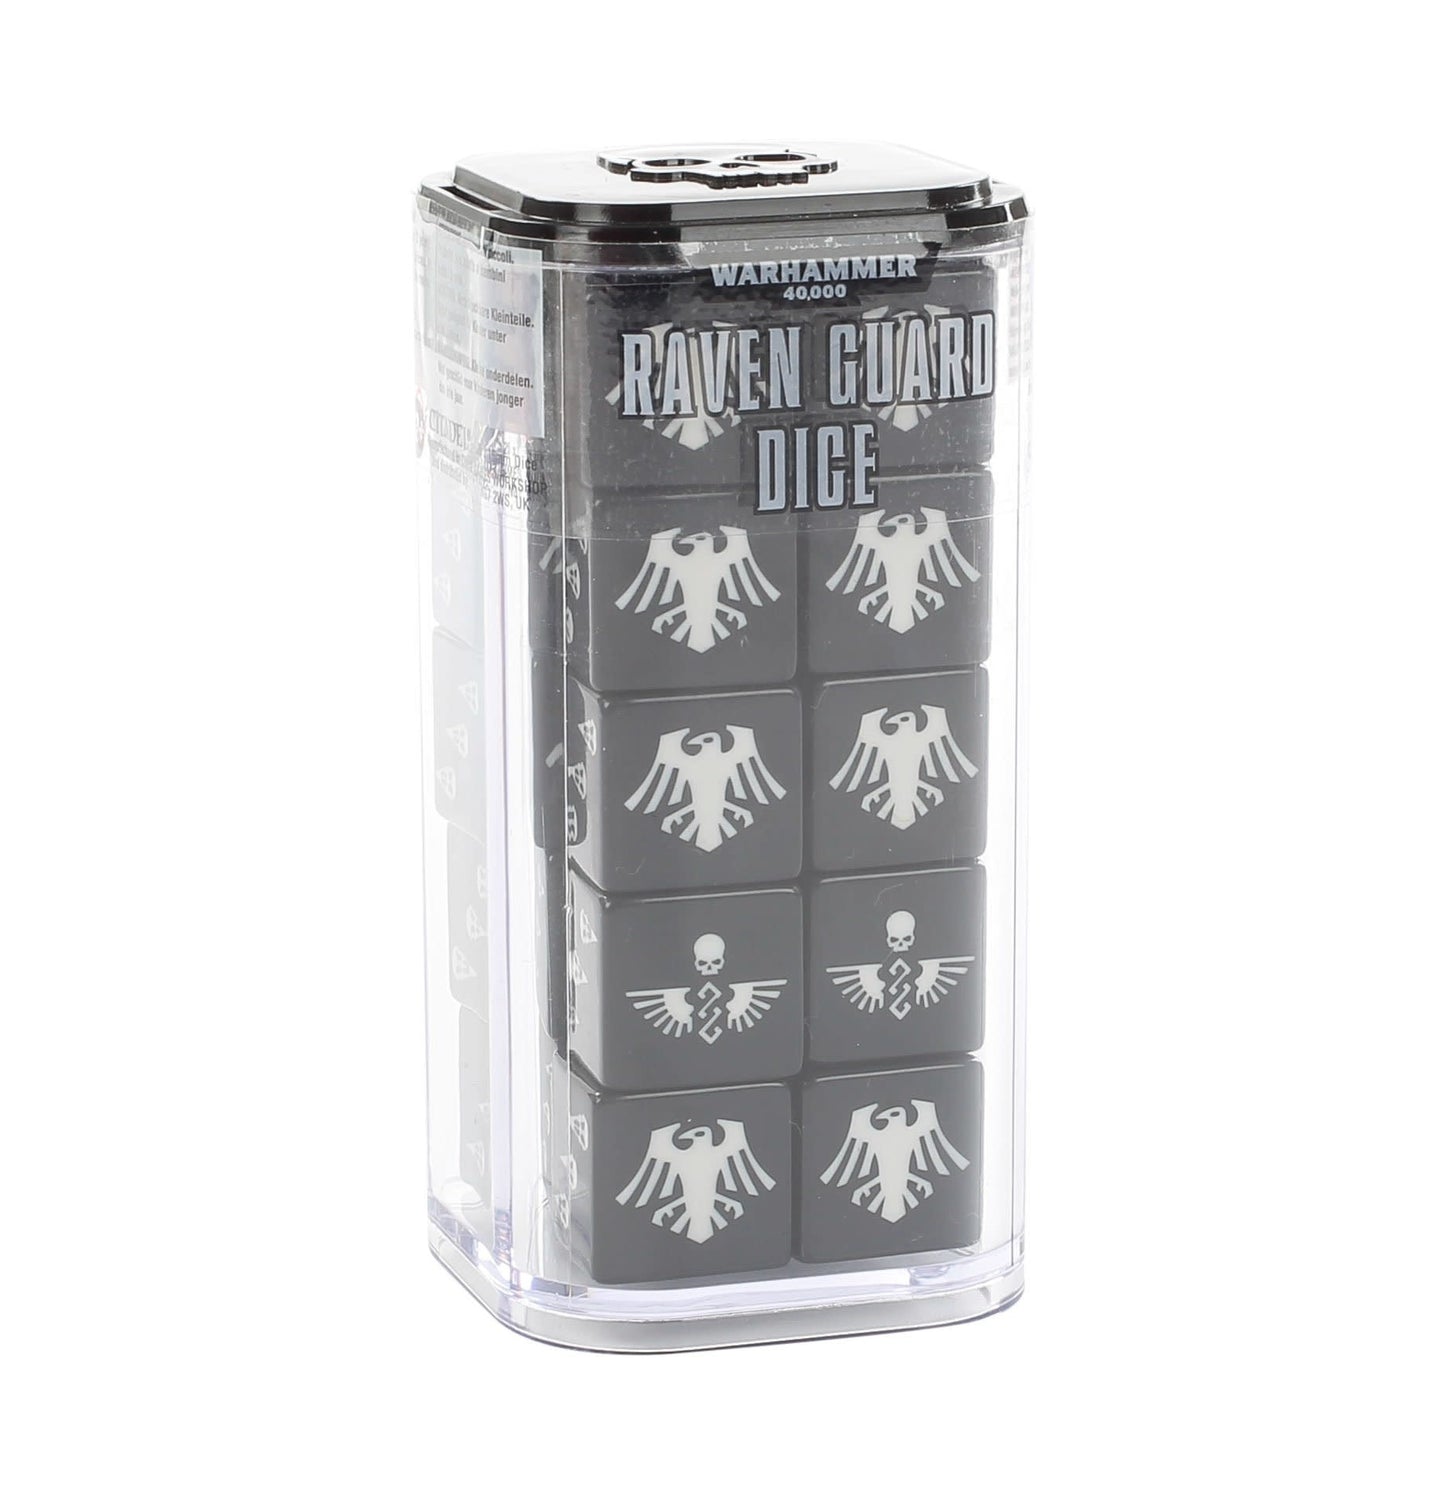 Space Marines Raven Guard Dice - Warhammer: 40k - The Hooded Goblin